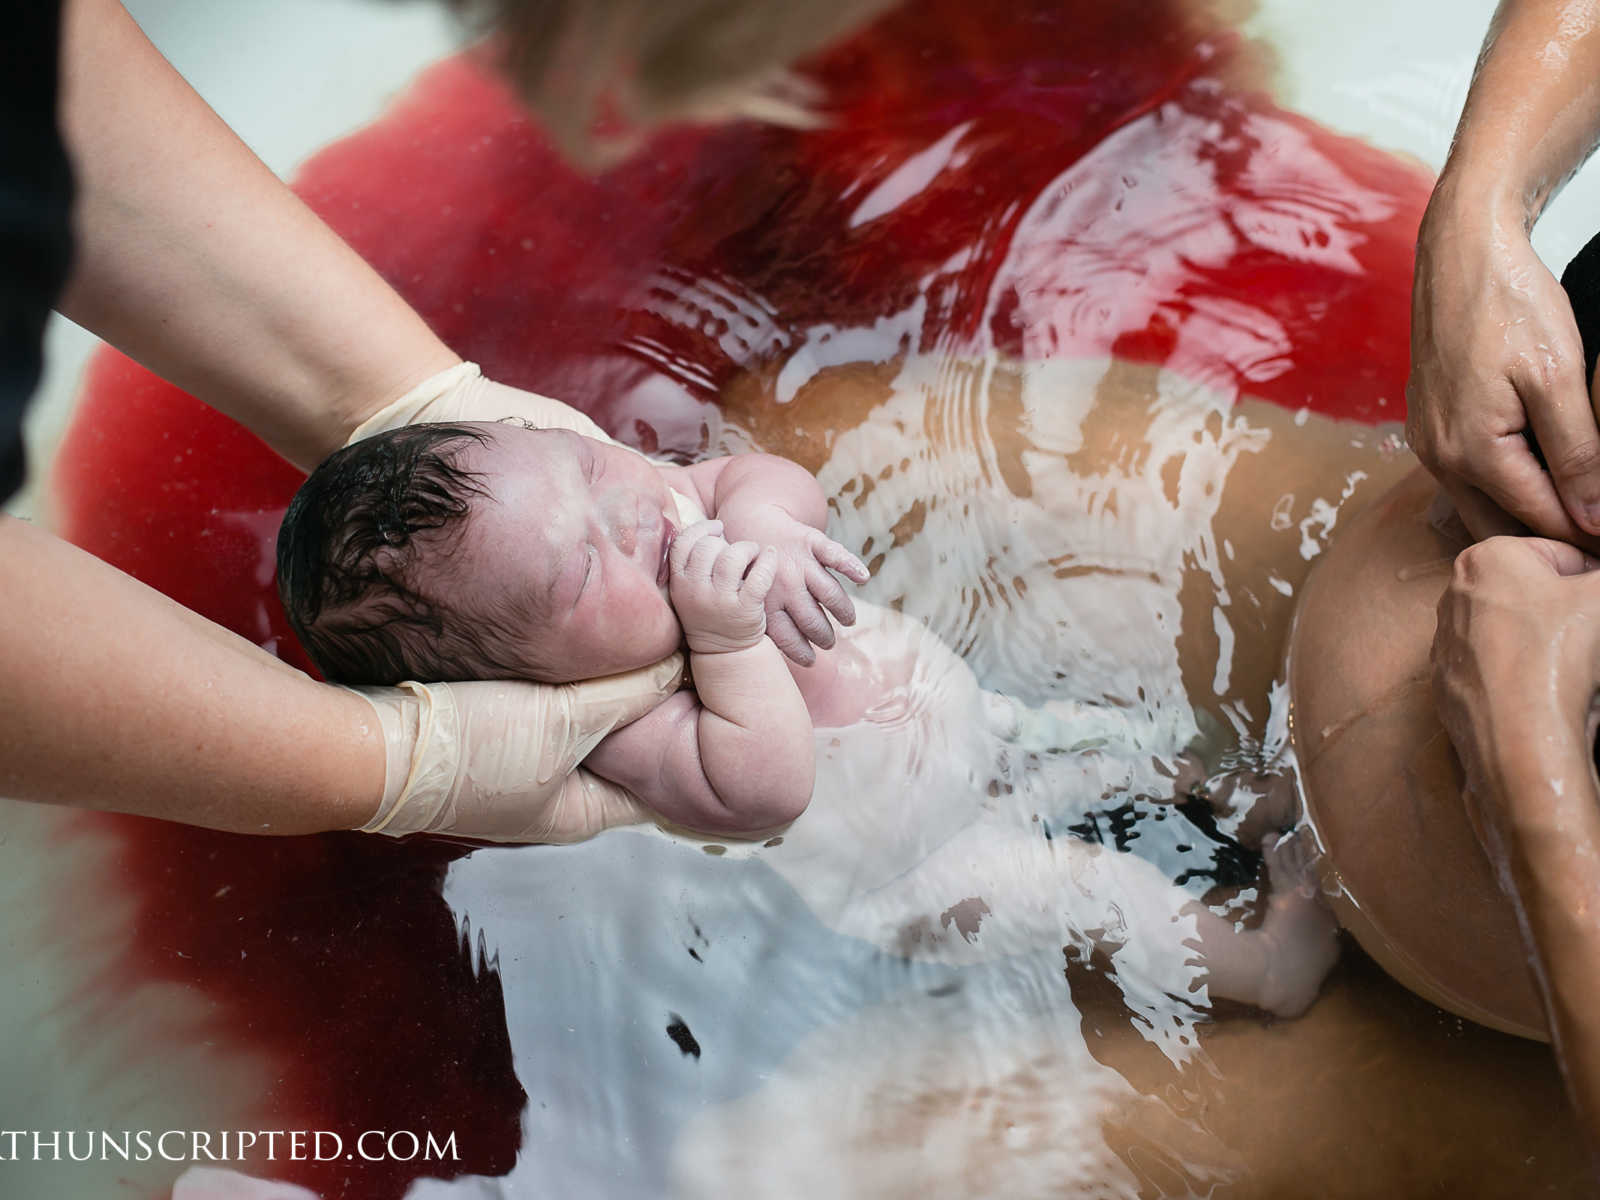 woman giving birth in bloody water while someone pulls out baby